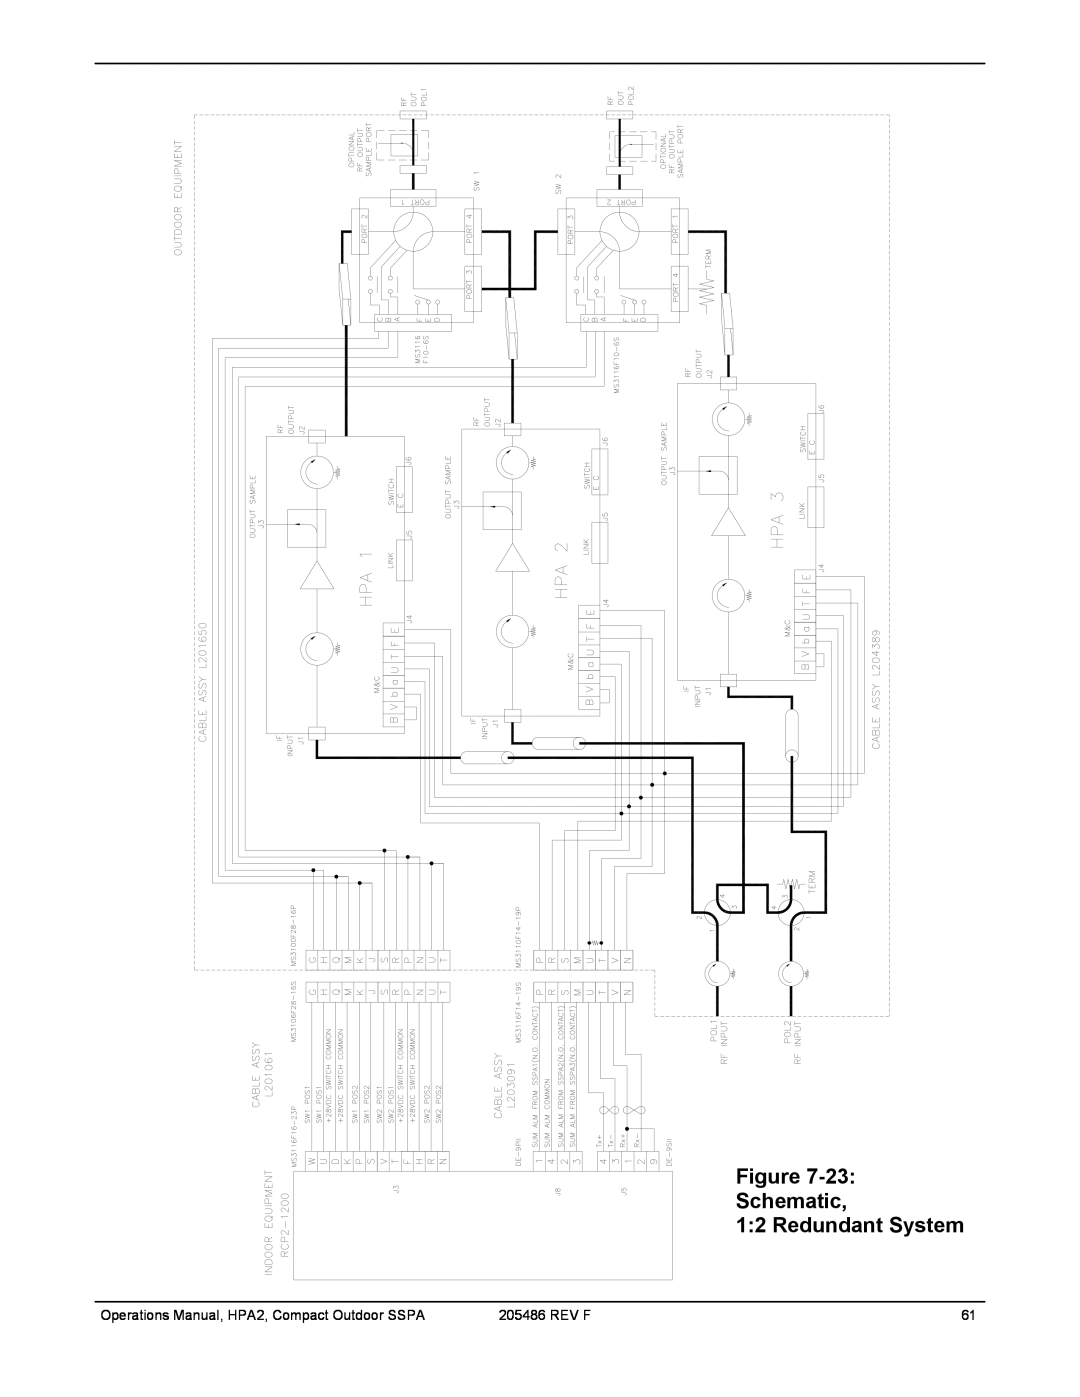 Paradise 205486 REV F manual Figure Schematic 1:2 Redundant System, Operations Manual, HPA2, Compact Outdoor SSPA, Rev F 